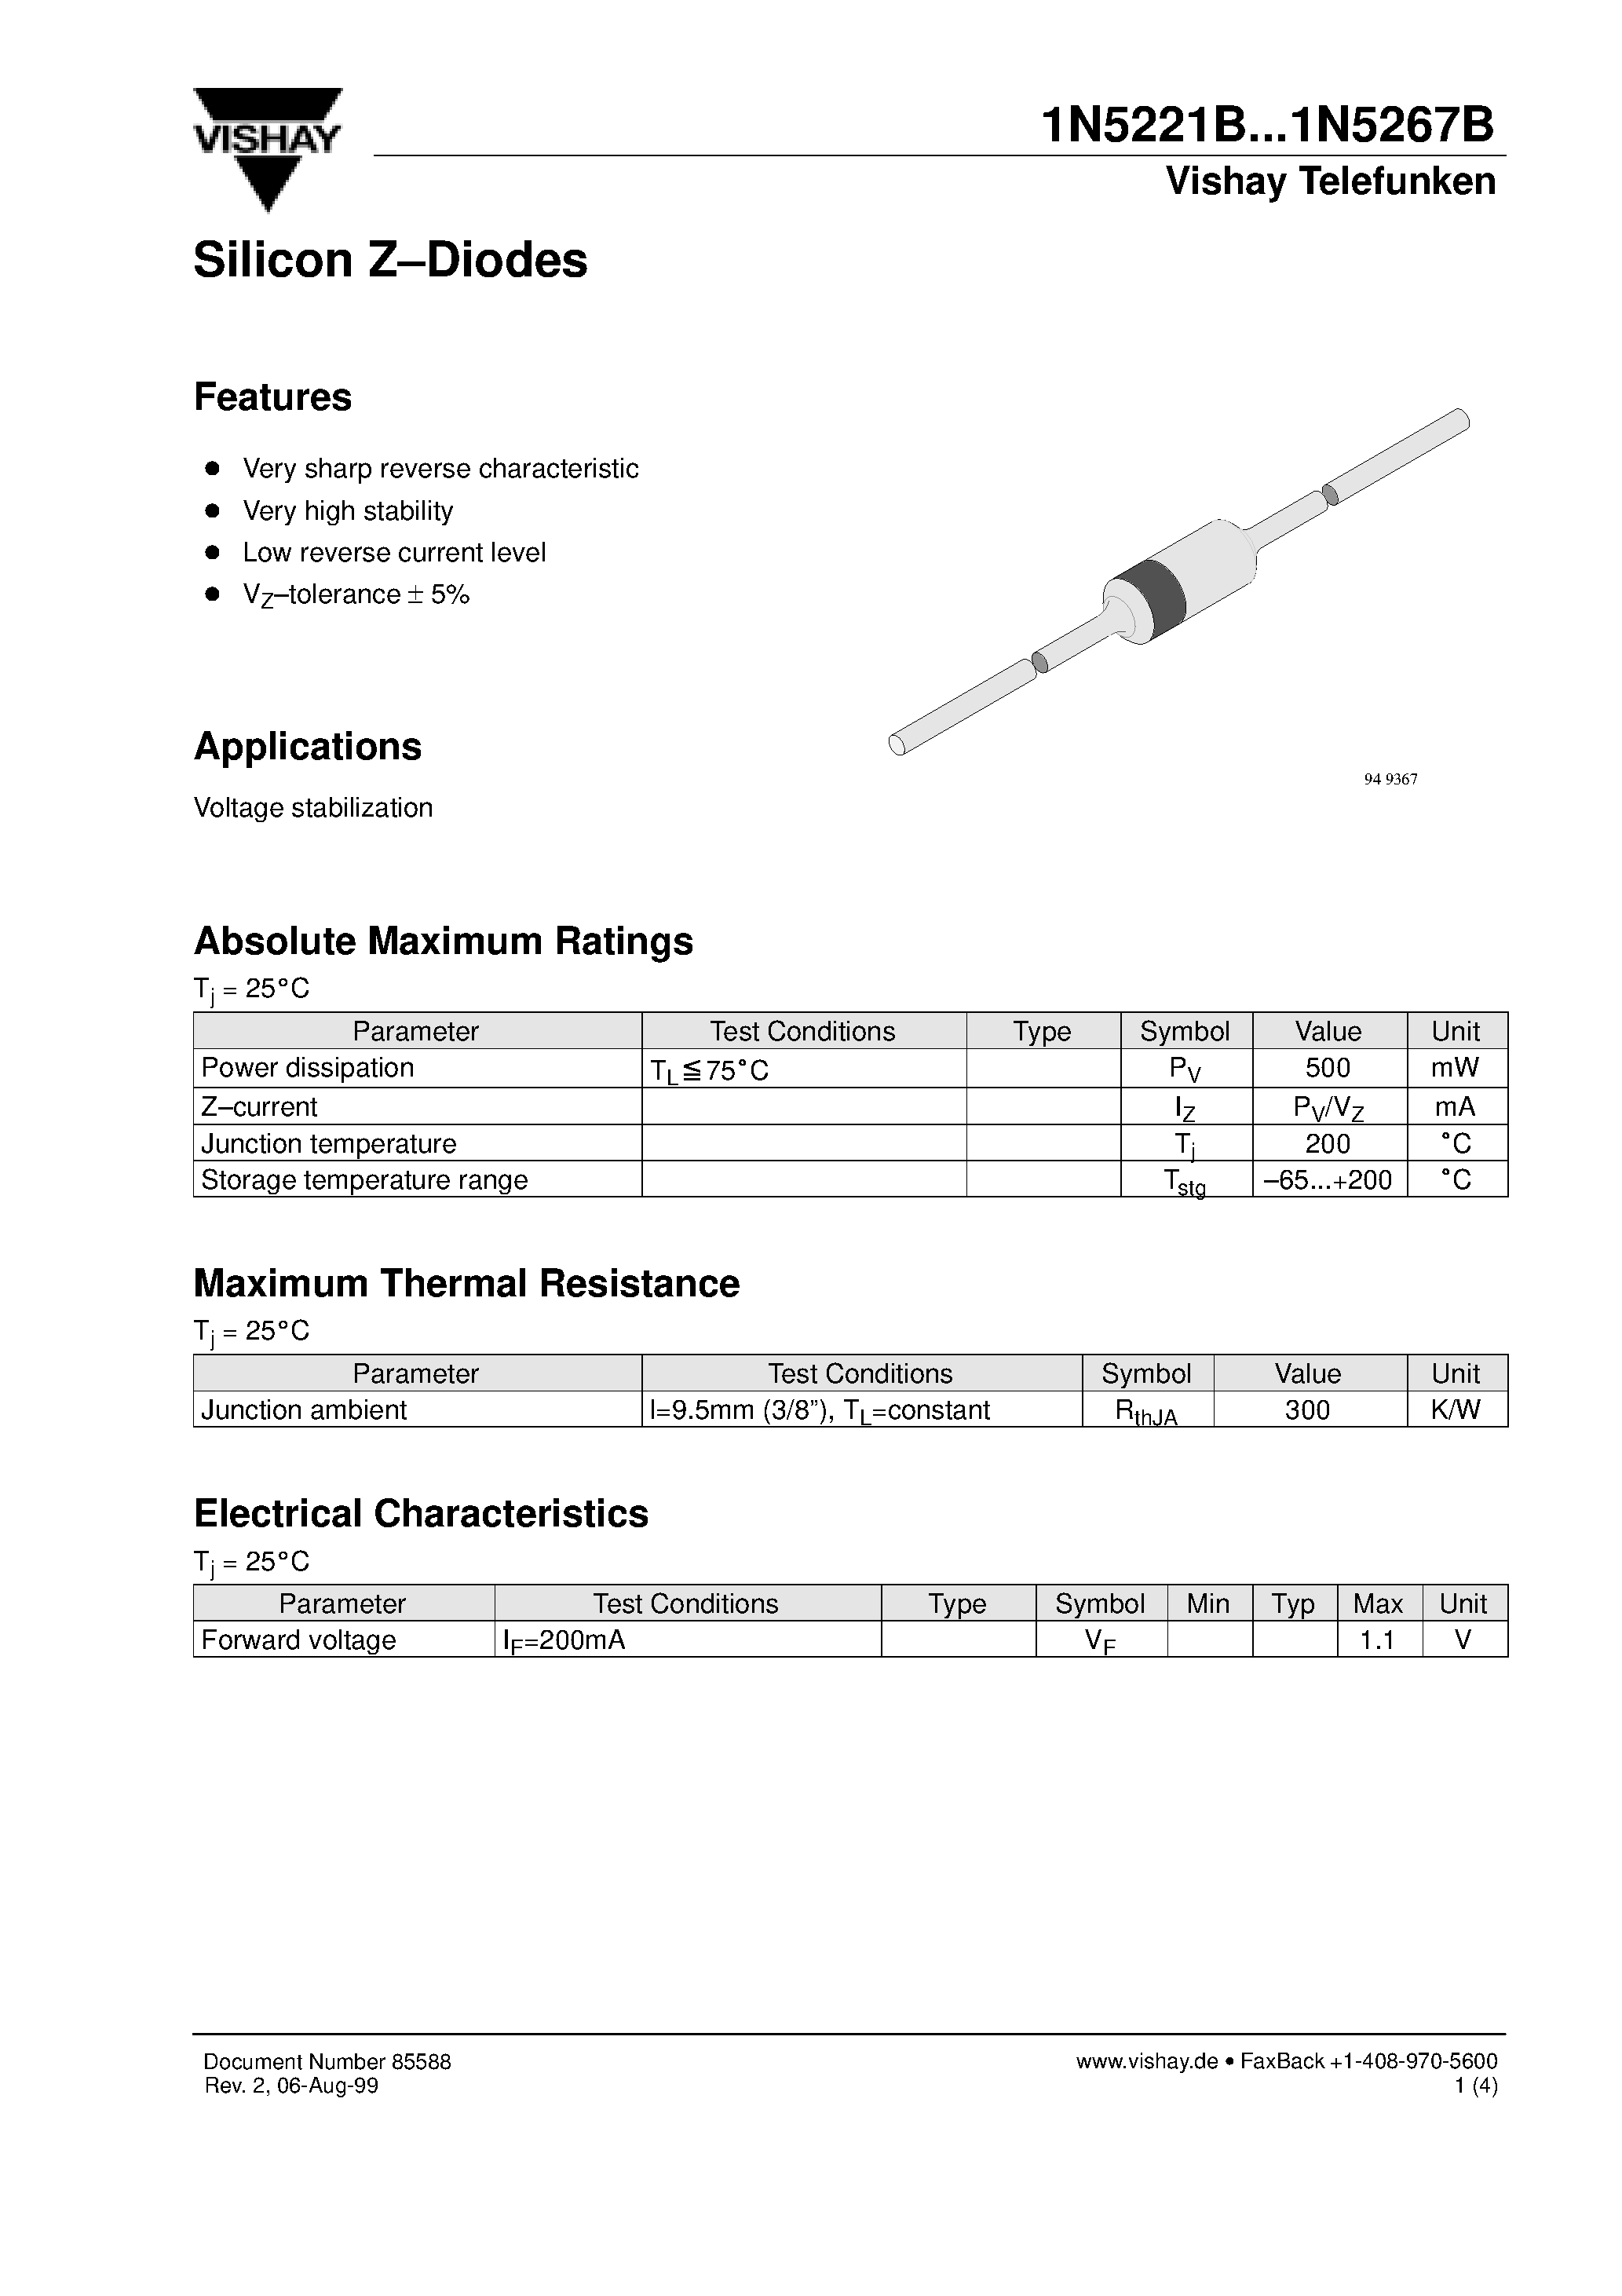 Datasheet 1N5244B - Silicon Z-Diodes page 1